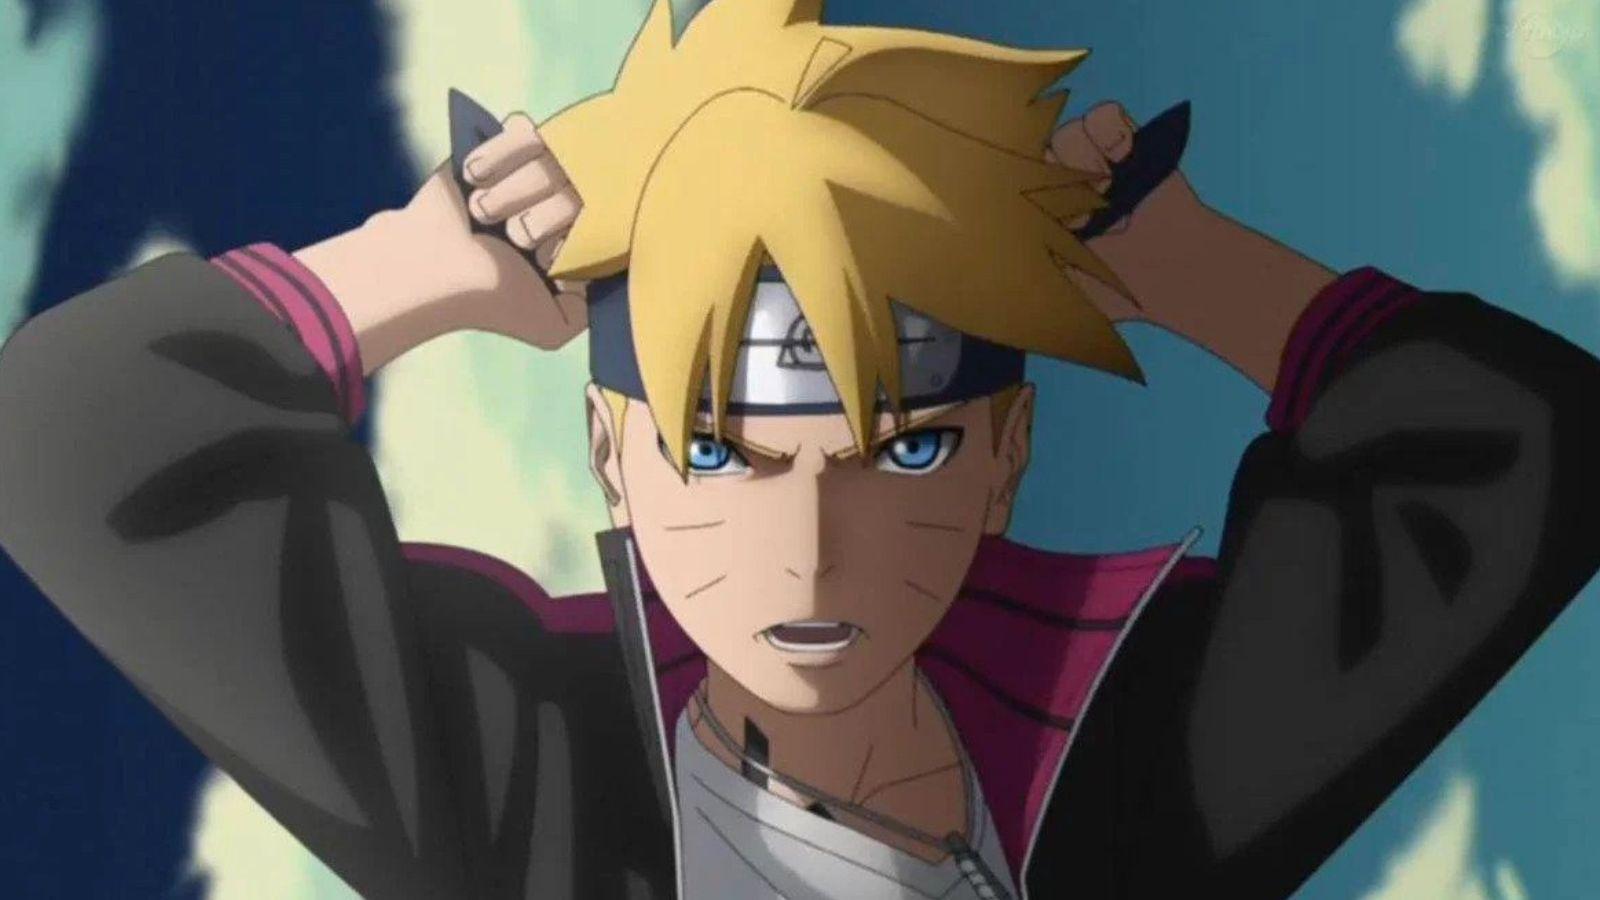 The fans have been asking, does Boruto really die? - Spiel Anime